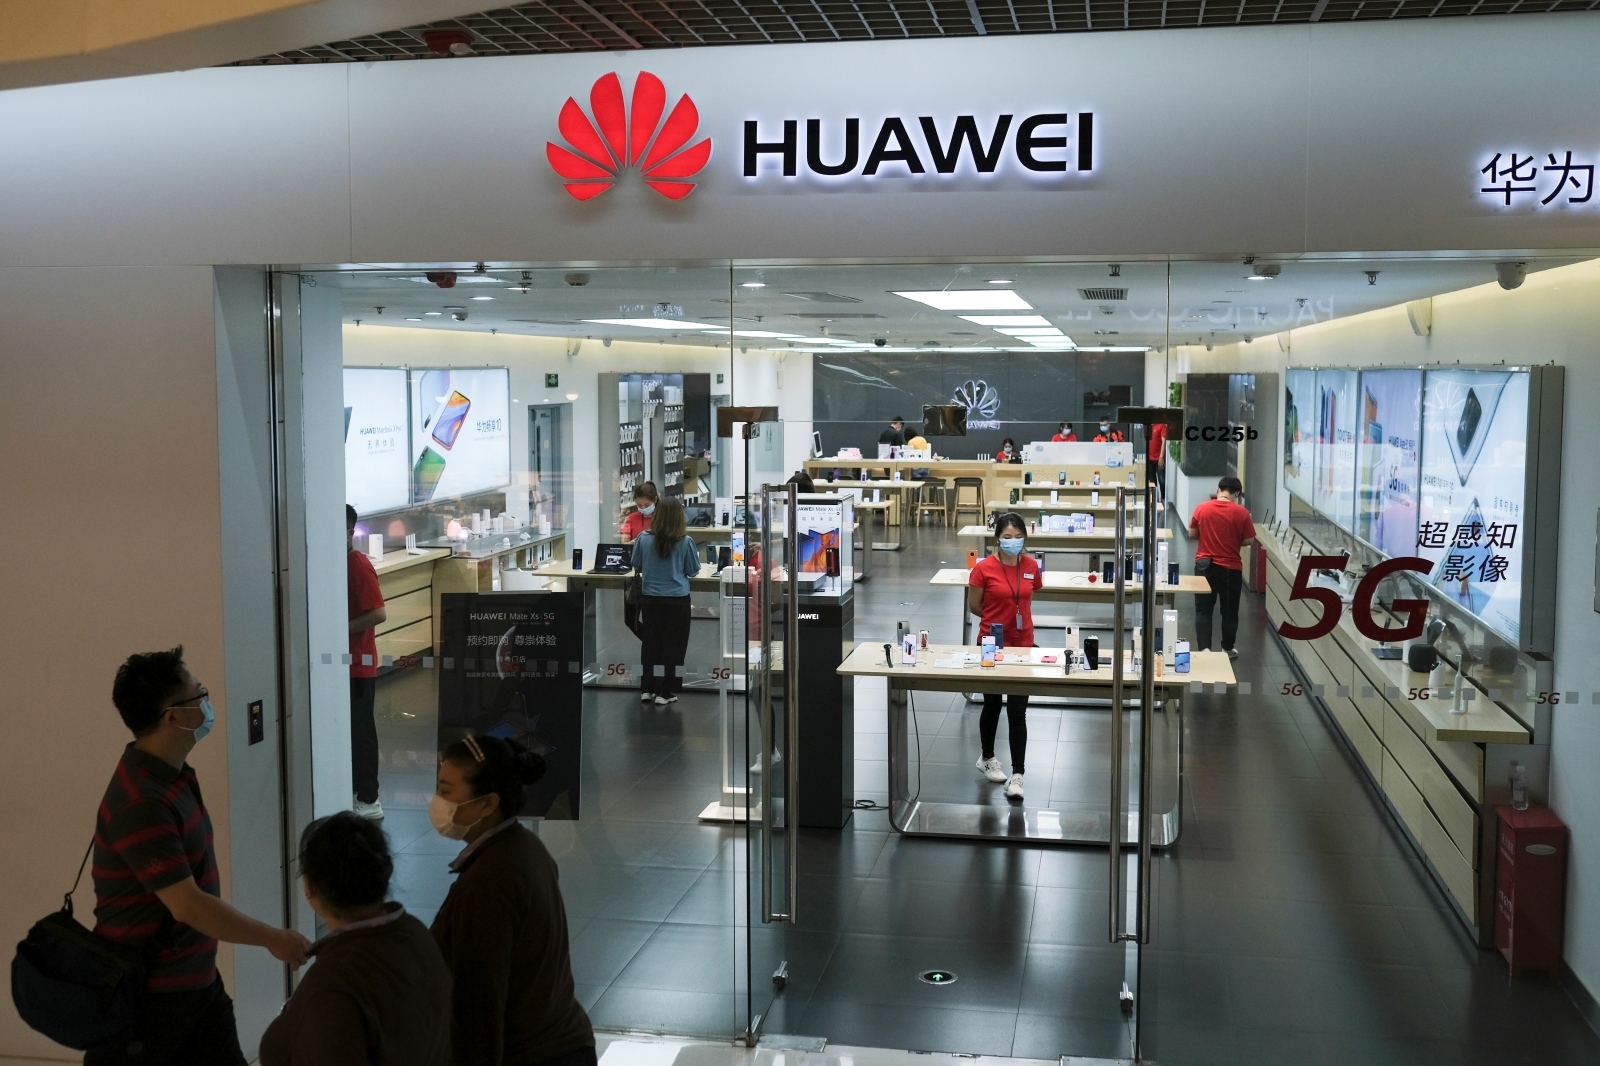 People wearing face masks walk past a?Huawei?store at a shopping mall, following an outbreak of the coronavirus disease (COVID-19), in Beijing People wearing face masks walk past a?Huawei?store at a shopping mall, following an outbreak of the coronavirus disease (COVID-19), in Beijing, China May 18, 2020. REUTERS/Carlos Garcia Rawlins CARLOS GARCIA RAWLINS